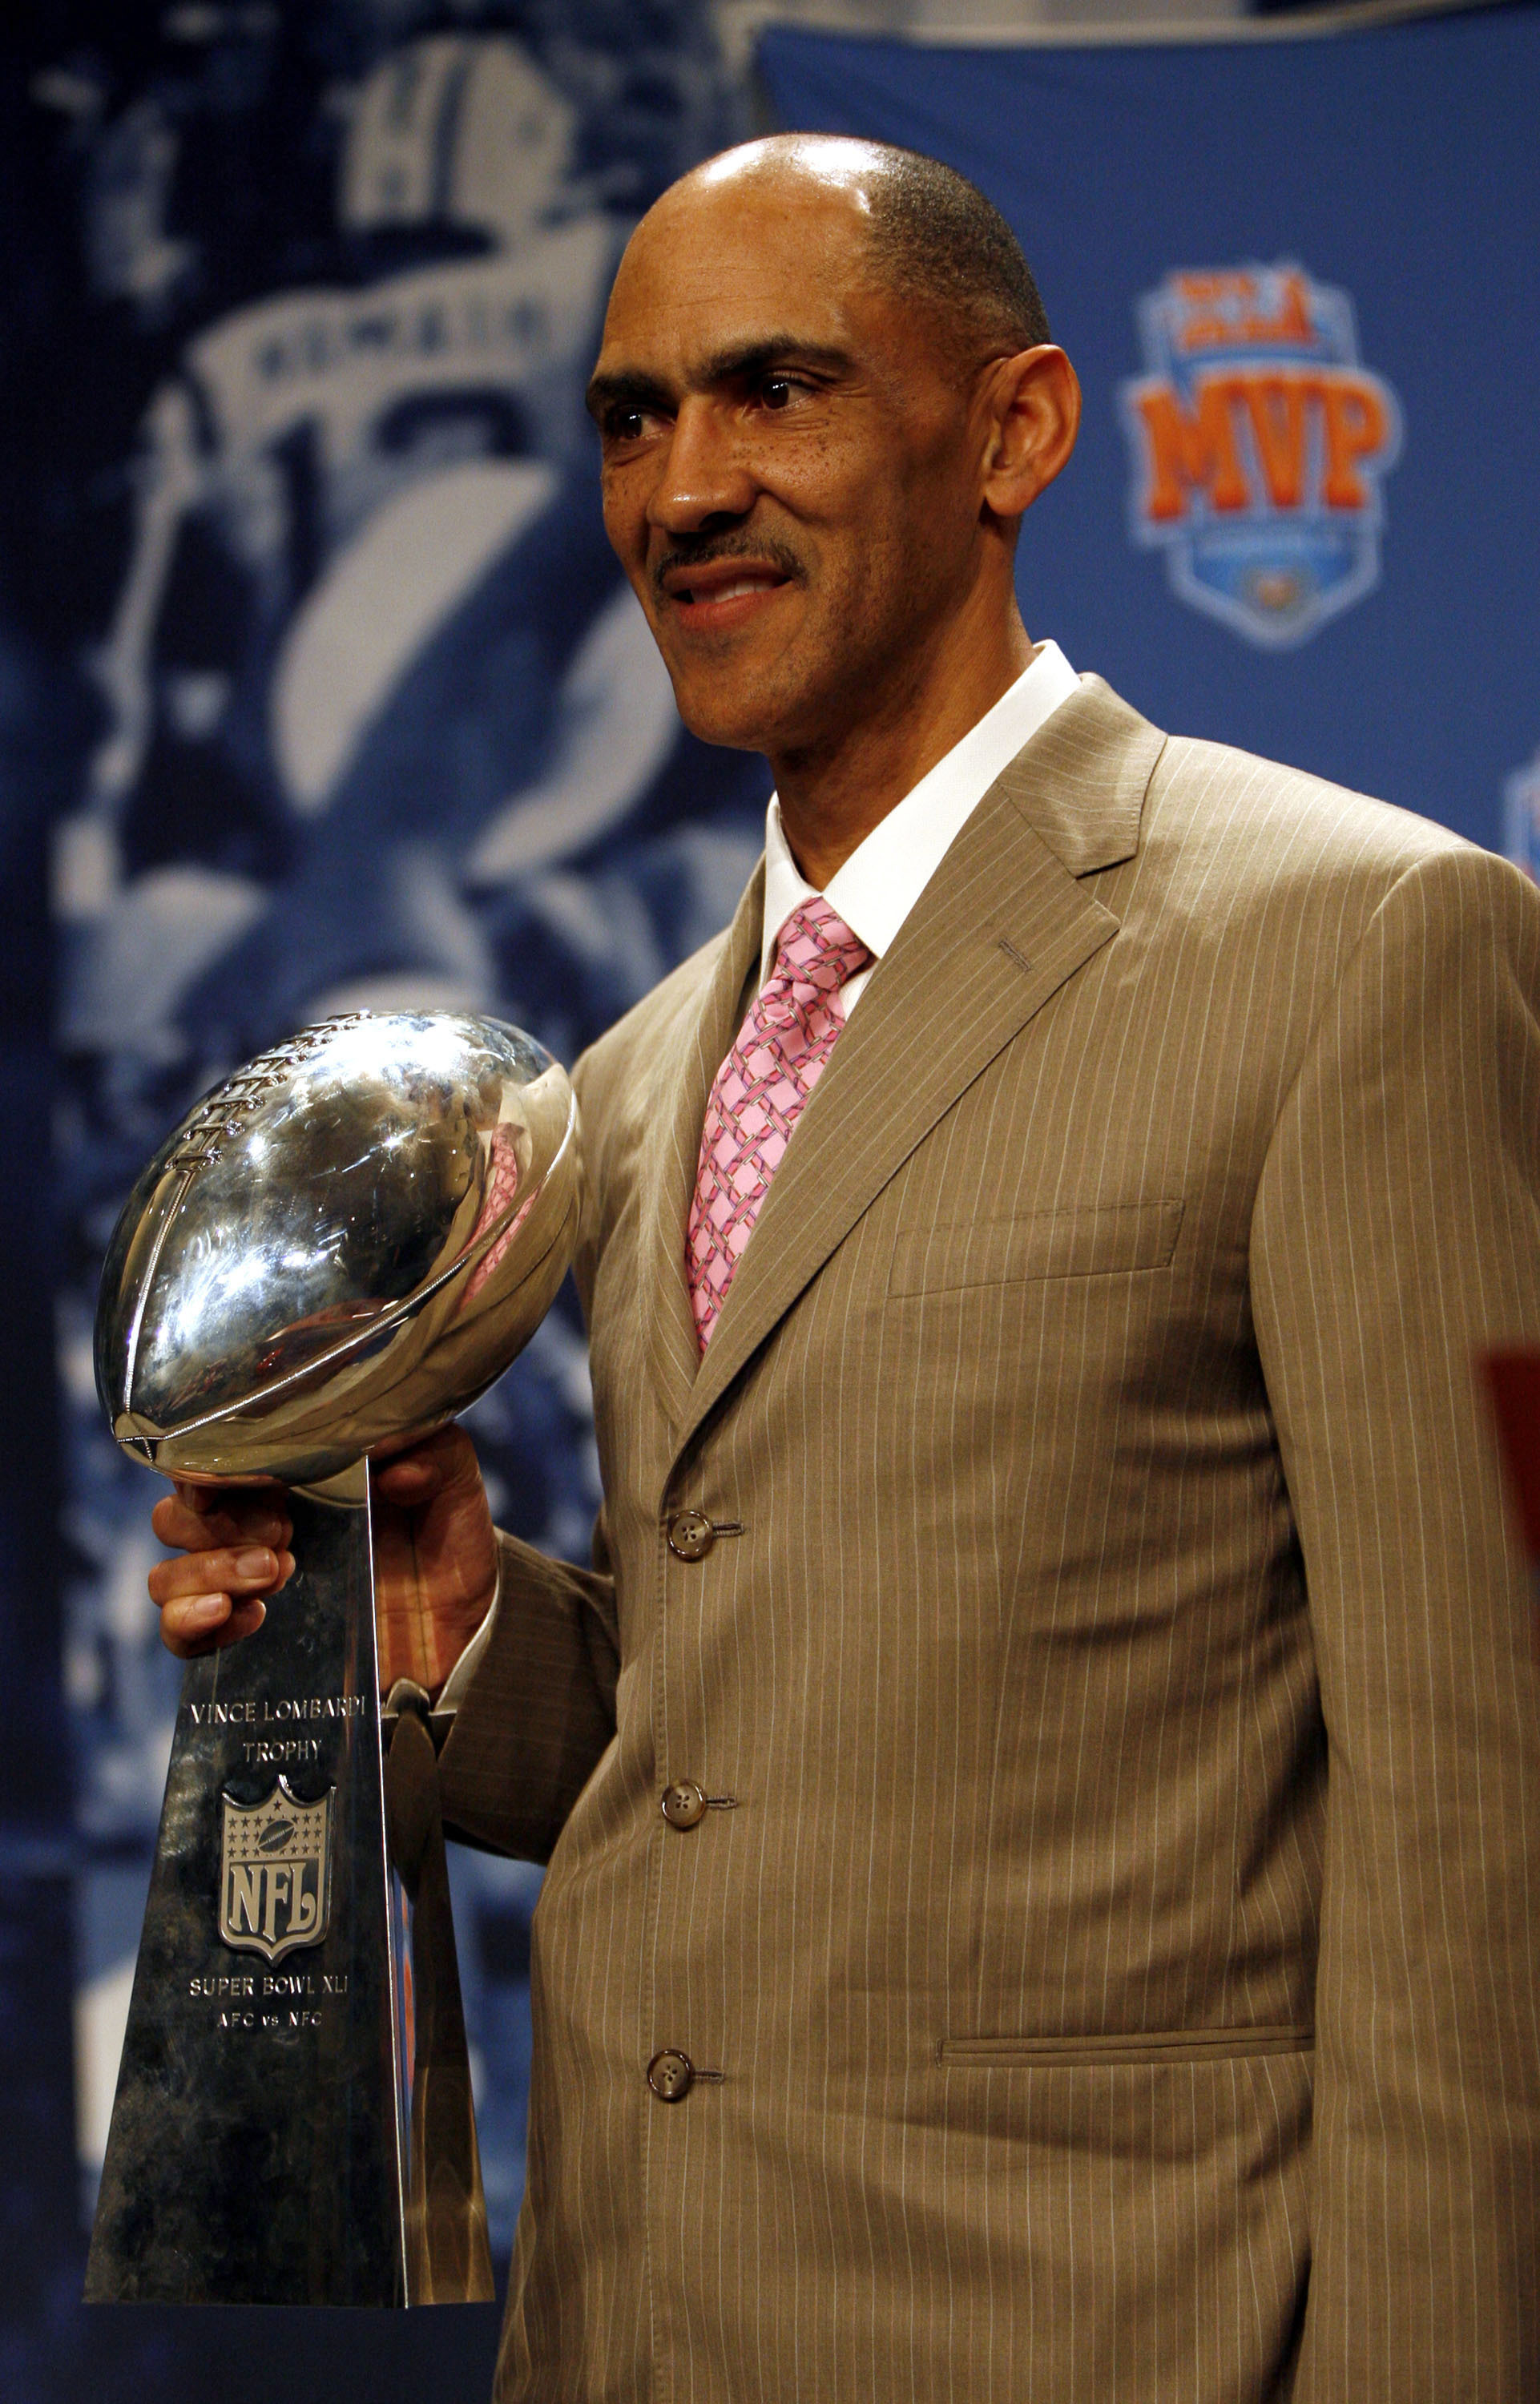 <p>Former NFL coach Tony Dungy made history during Super Bowl XLI in 2007 when he led the Indianapolis Colts to a championship and became the first Black head coach to win a ring.</p>